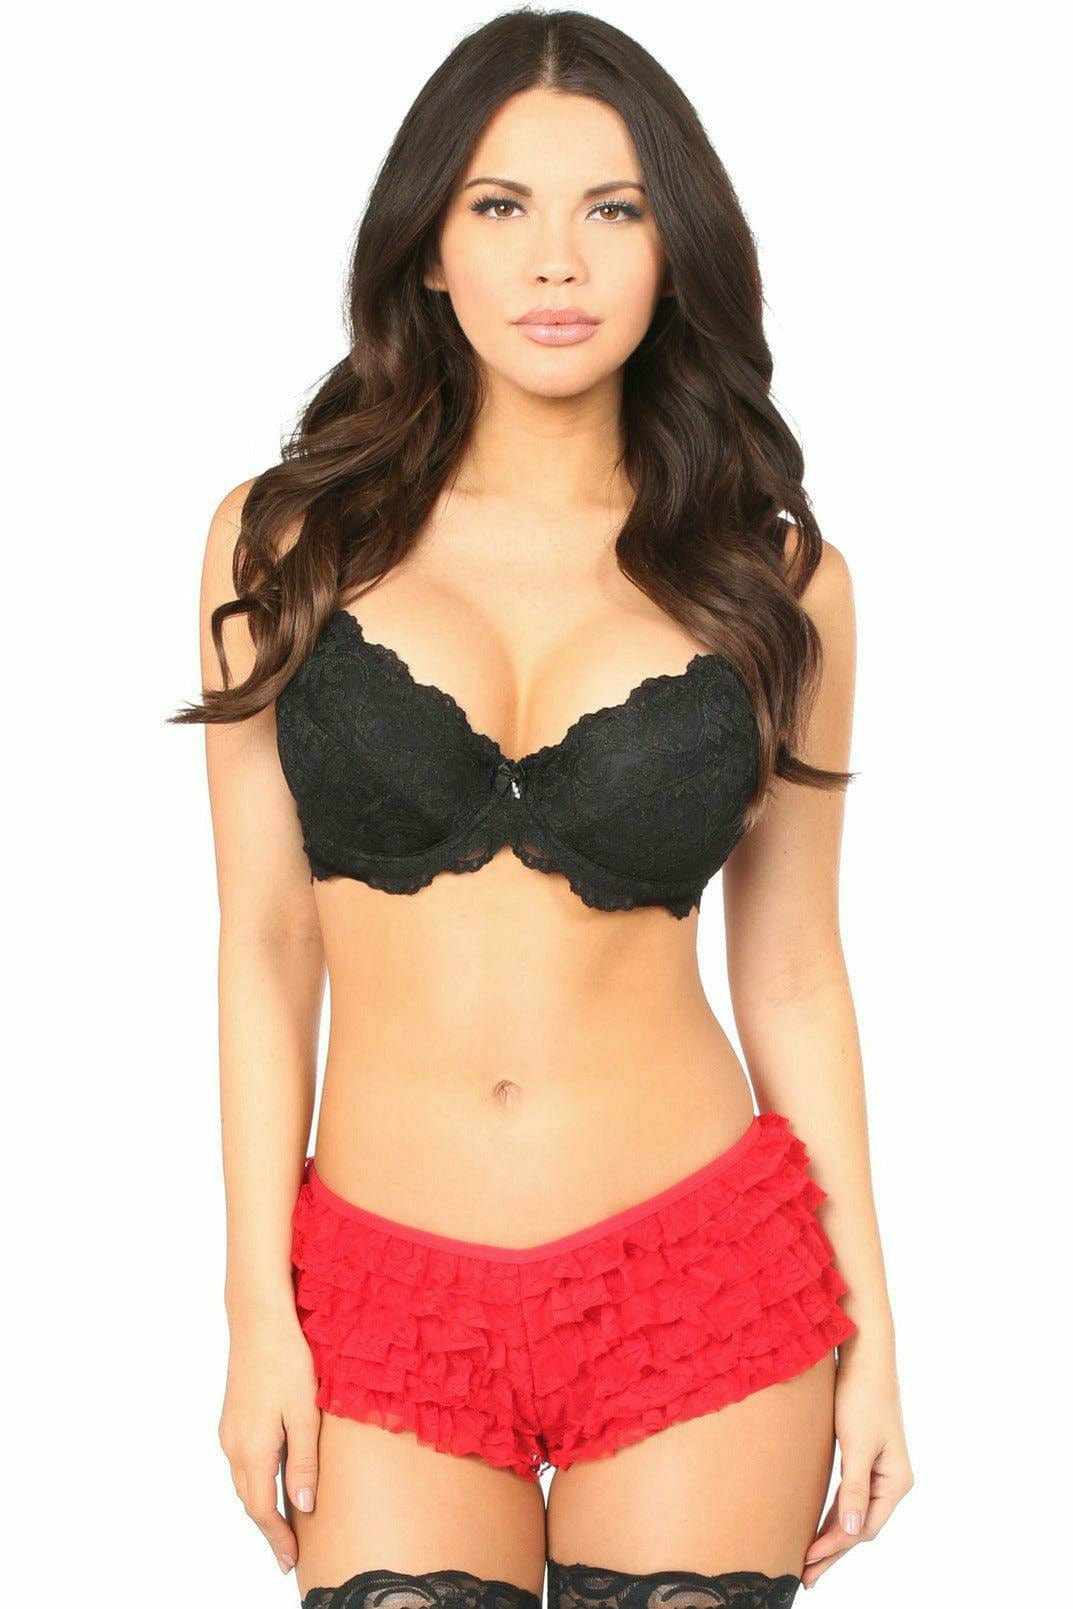 Red Lace Ruffle Panty Musotica.com